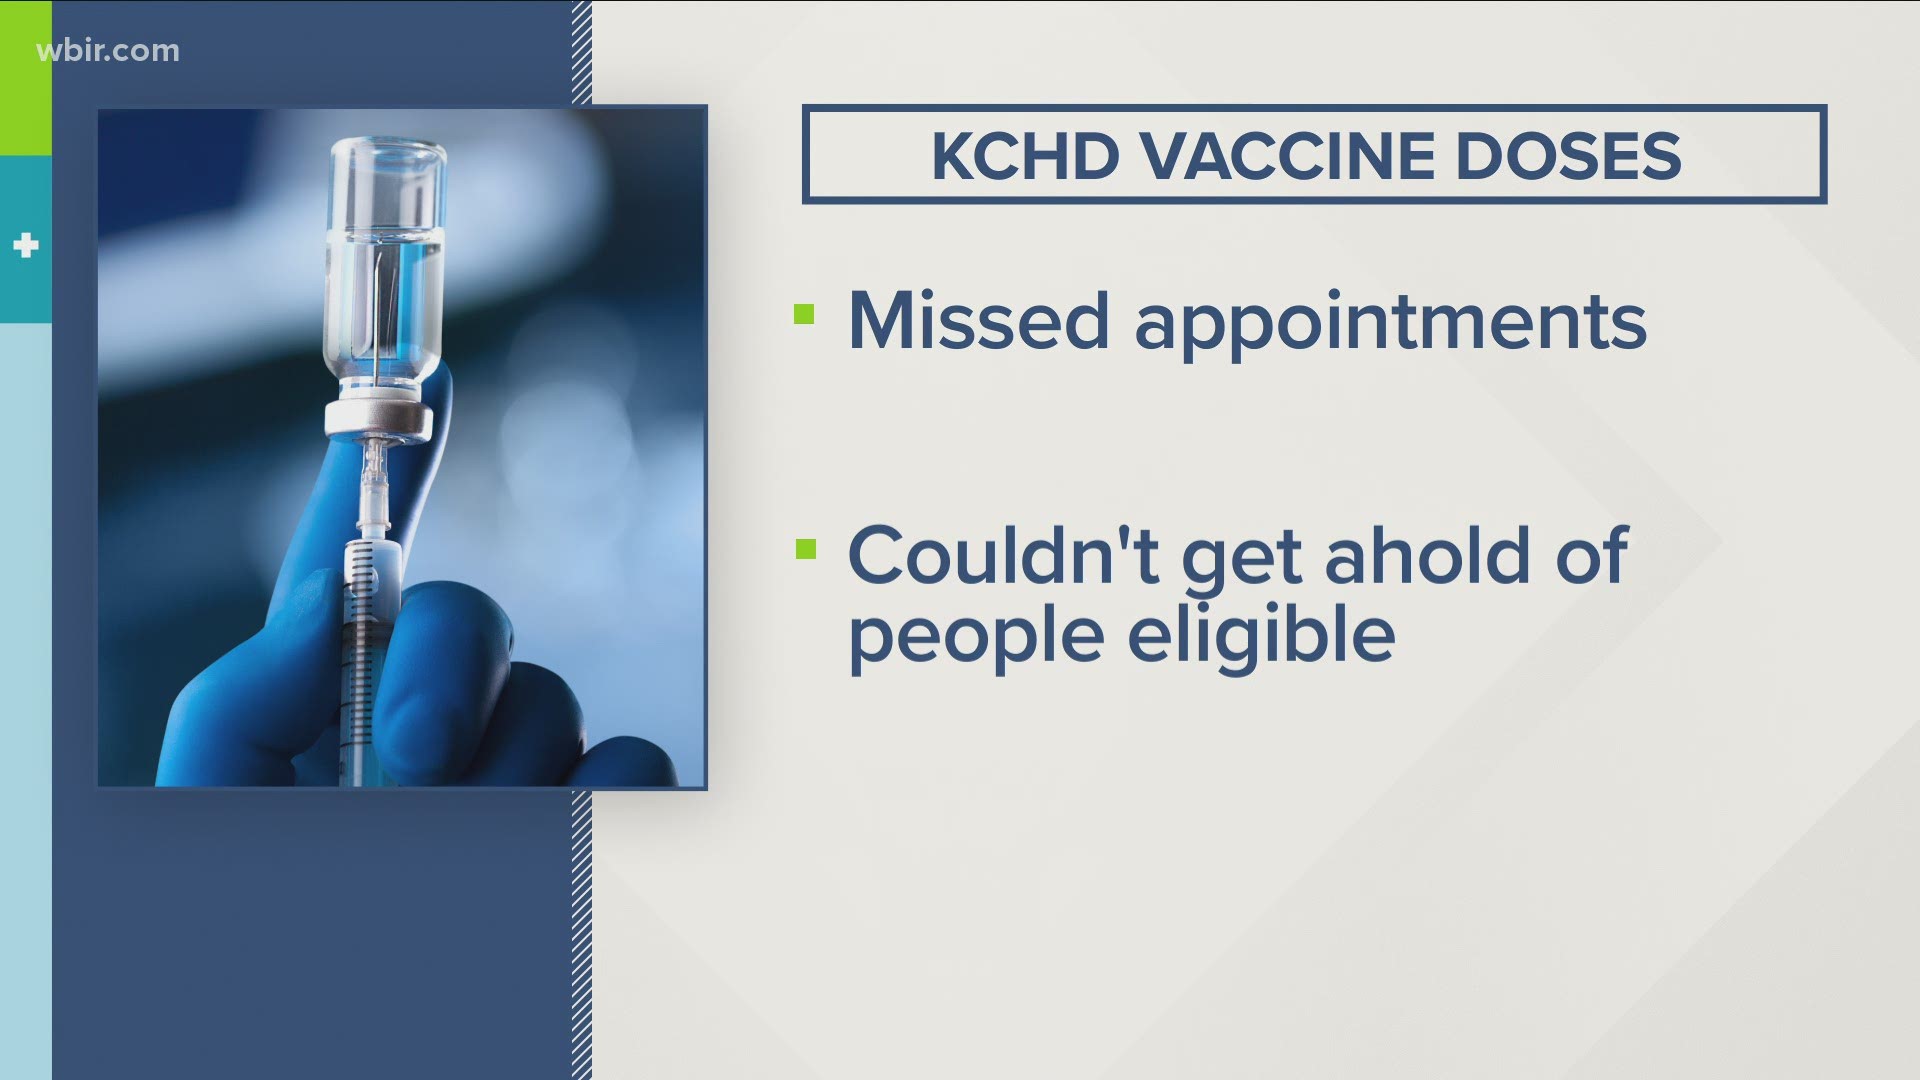 The department said it was forced to after people missed their appointments and couldn't track down enough new patients to get the shots before they expired.